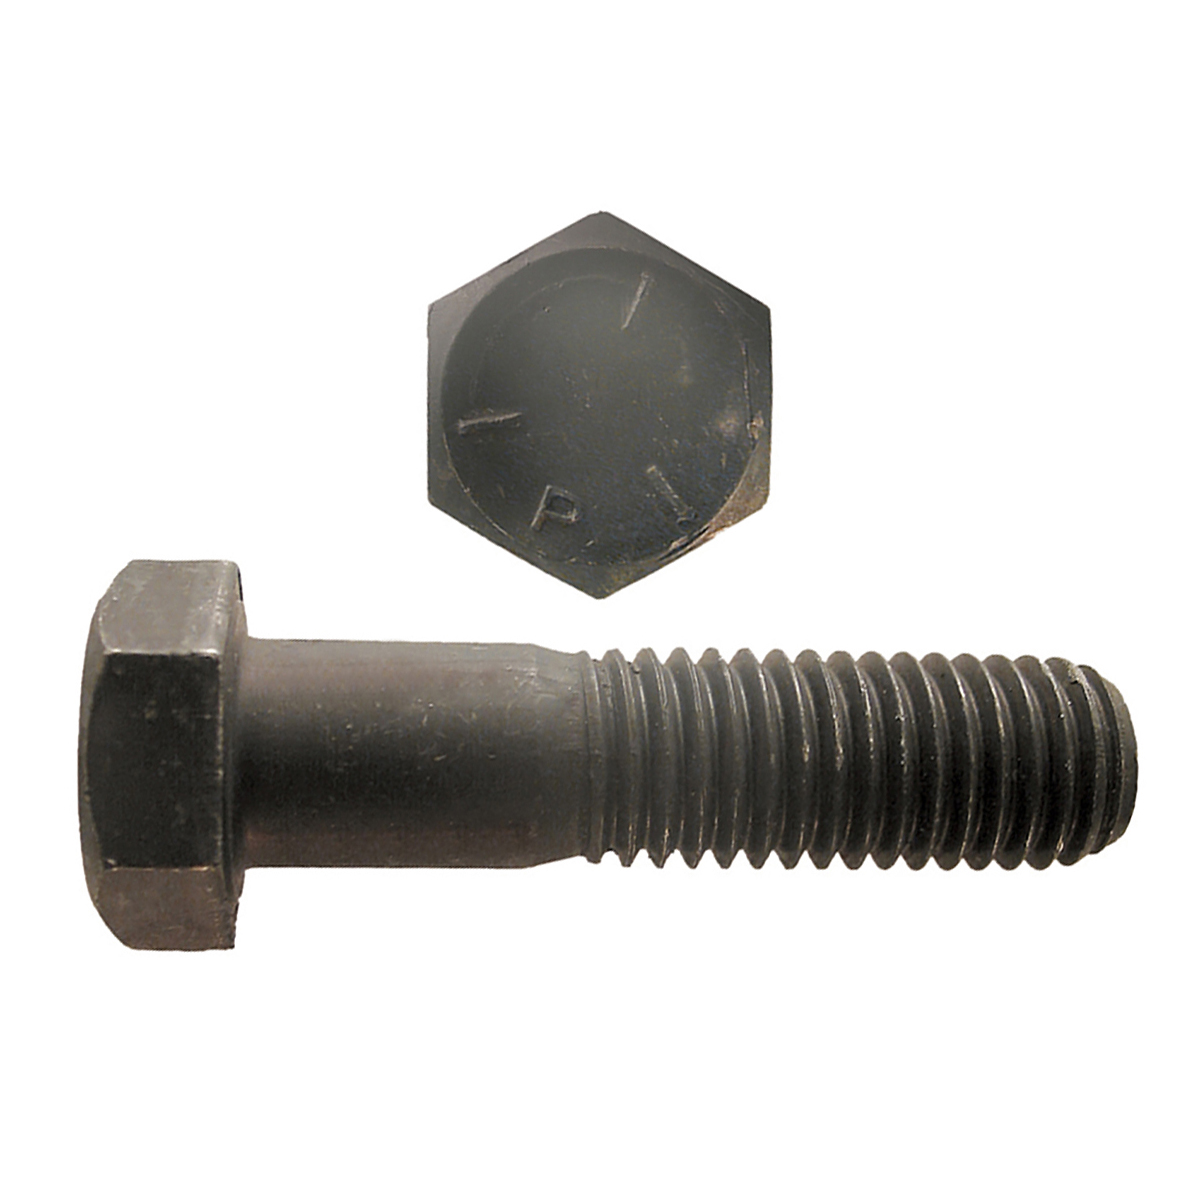 Double End Threaded Extension Adjusting Studs Screws #10-32 x 2-1/4” Steel 25 